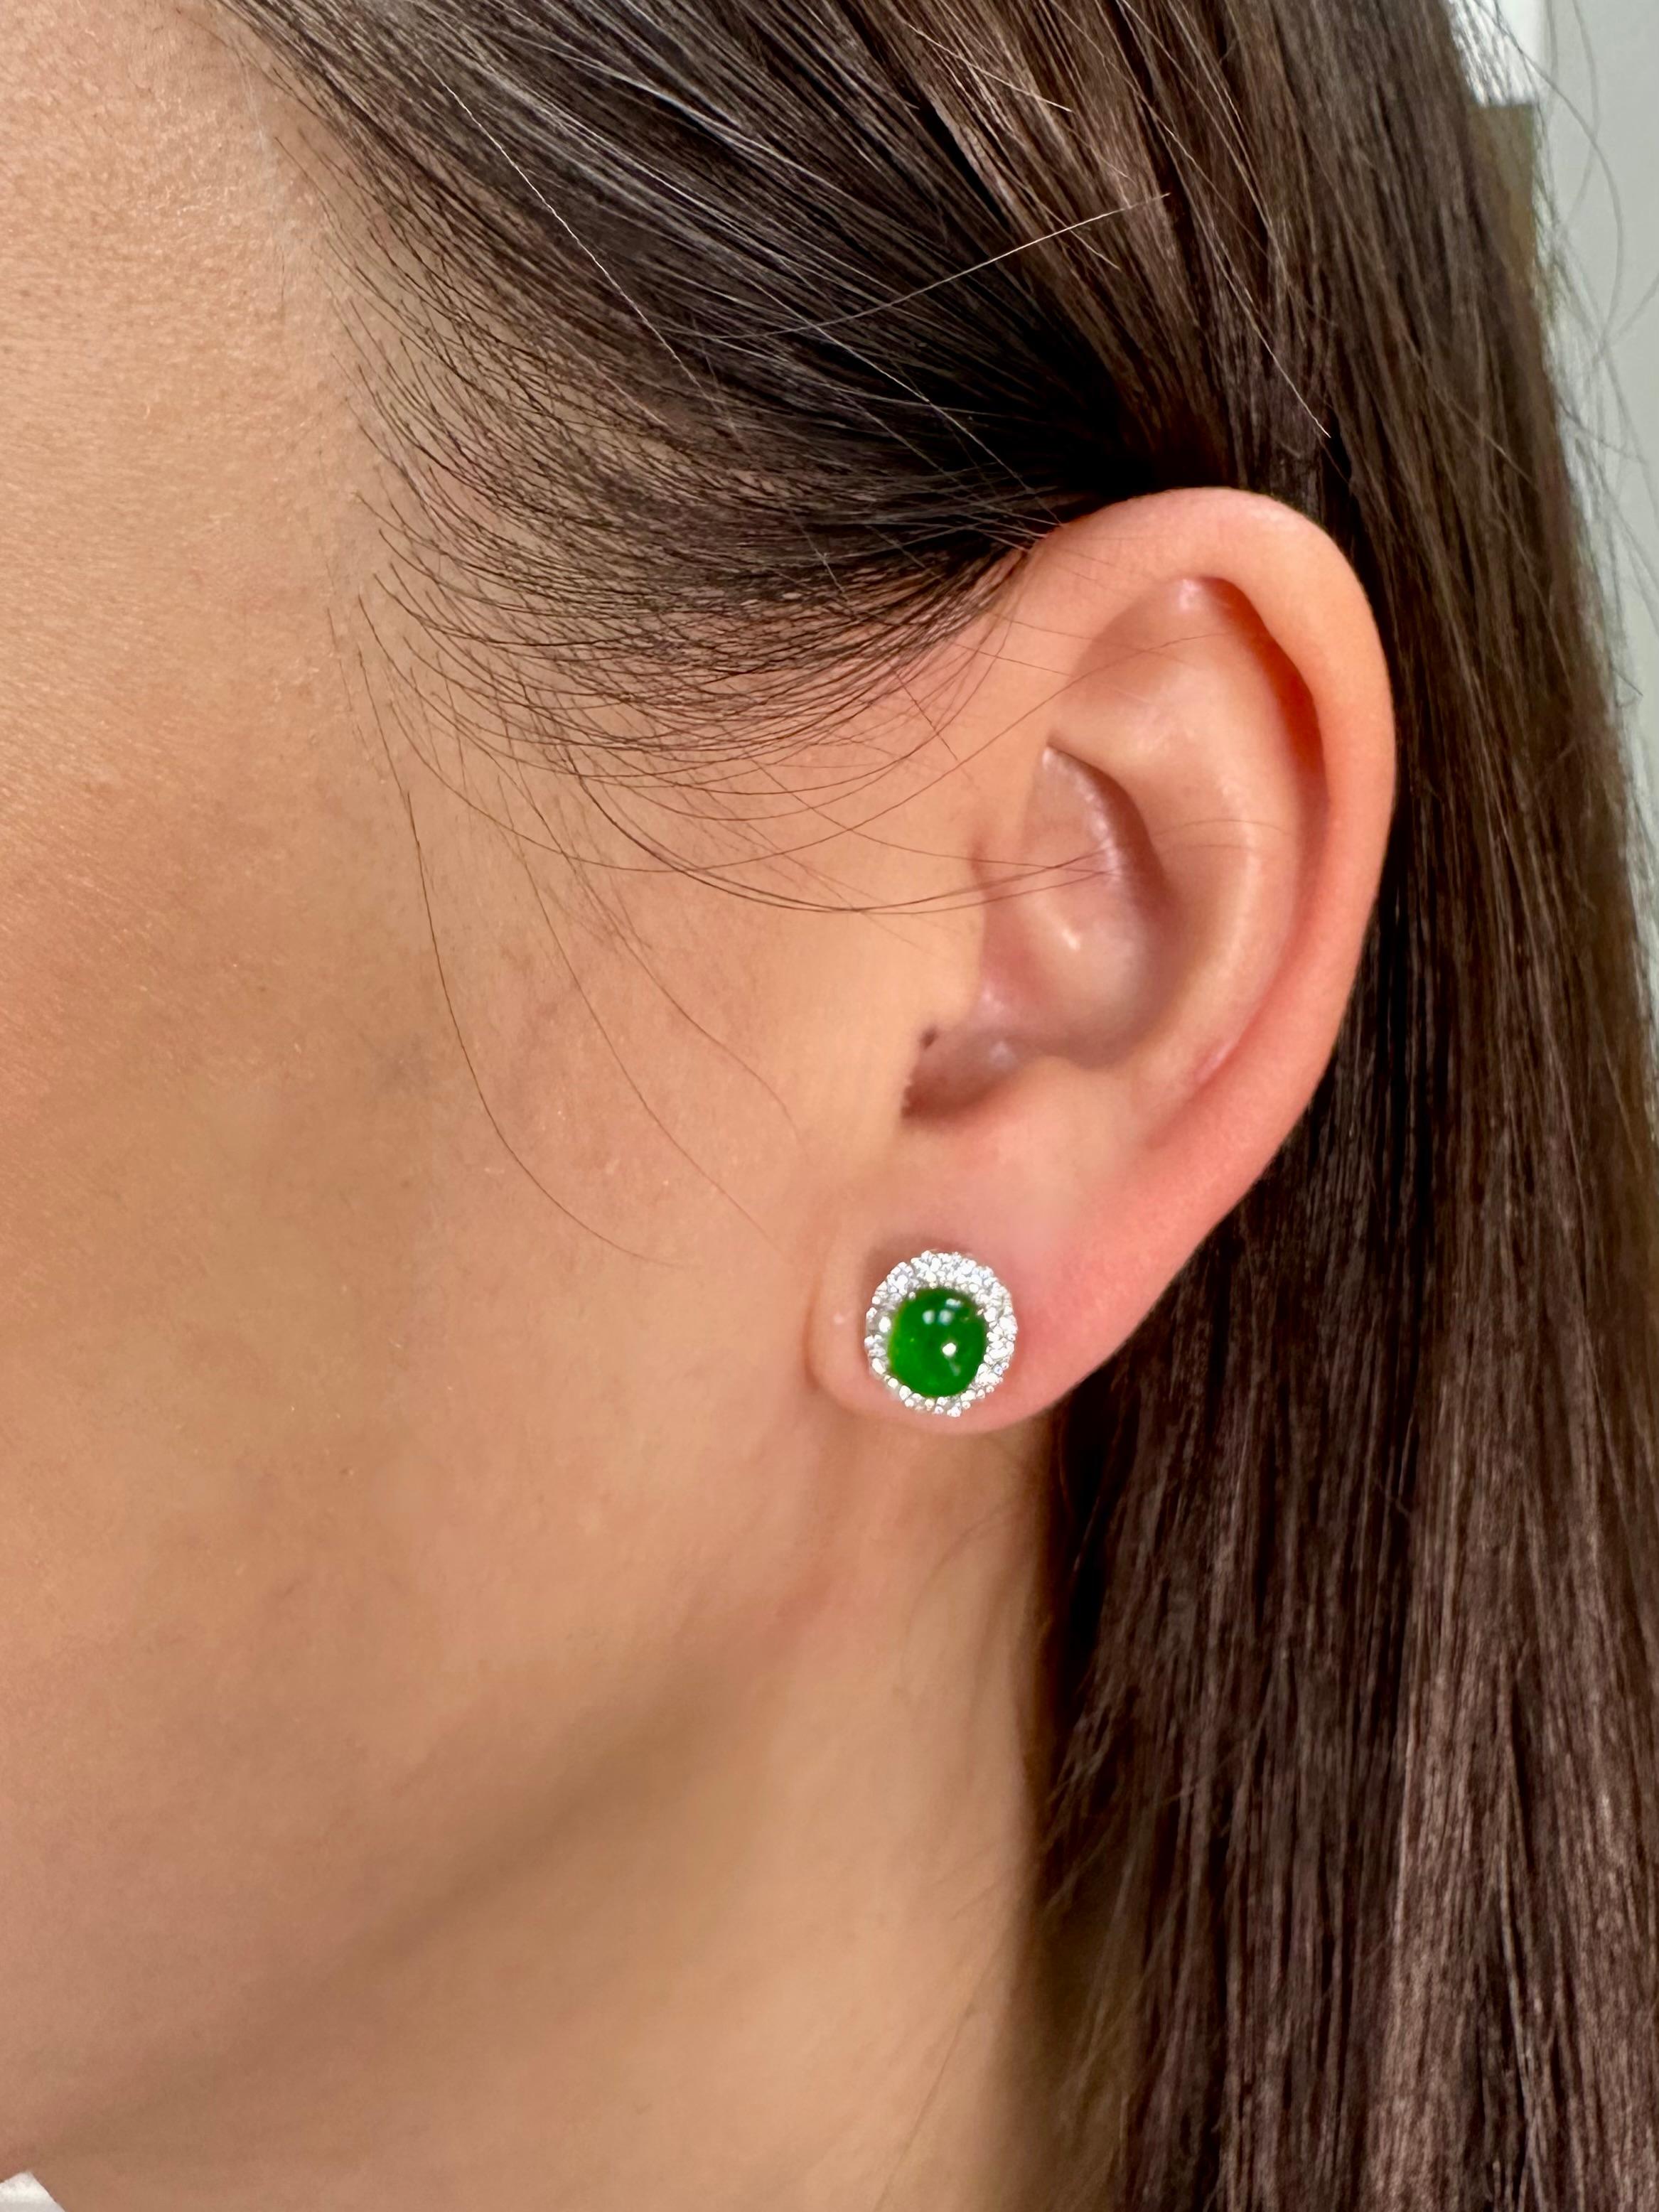 Please check out the HD video! It doesn't get much better than this! Here is a nice pair of true imperial green Jadeite Jade earrings. It has the best of the best glowing green color. The earrings are about 10.0mm each in outer diameter. The jade